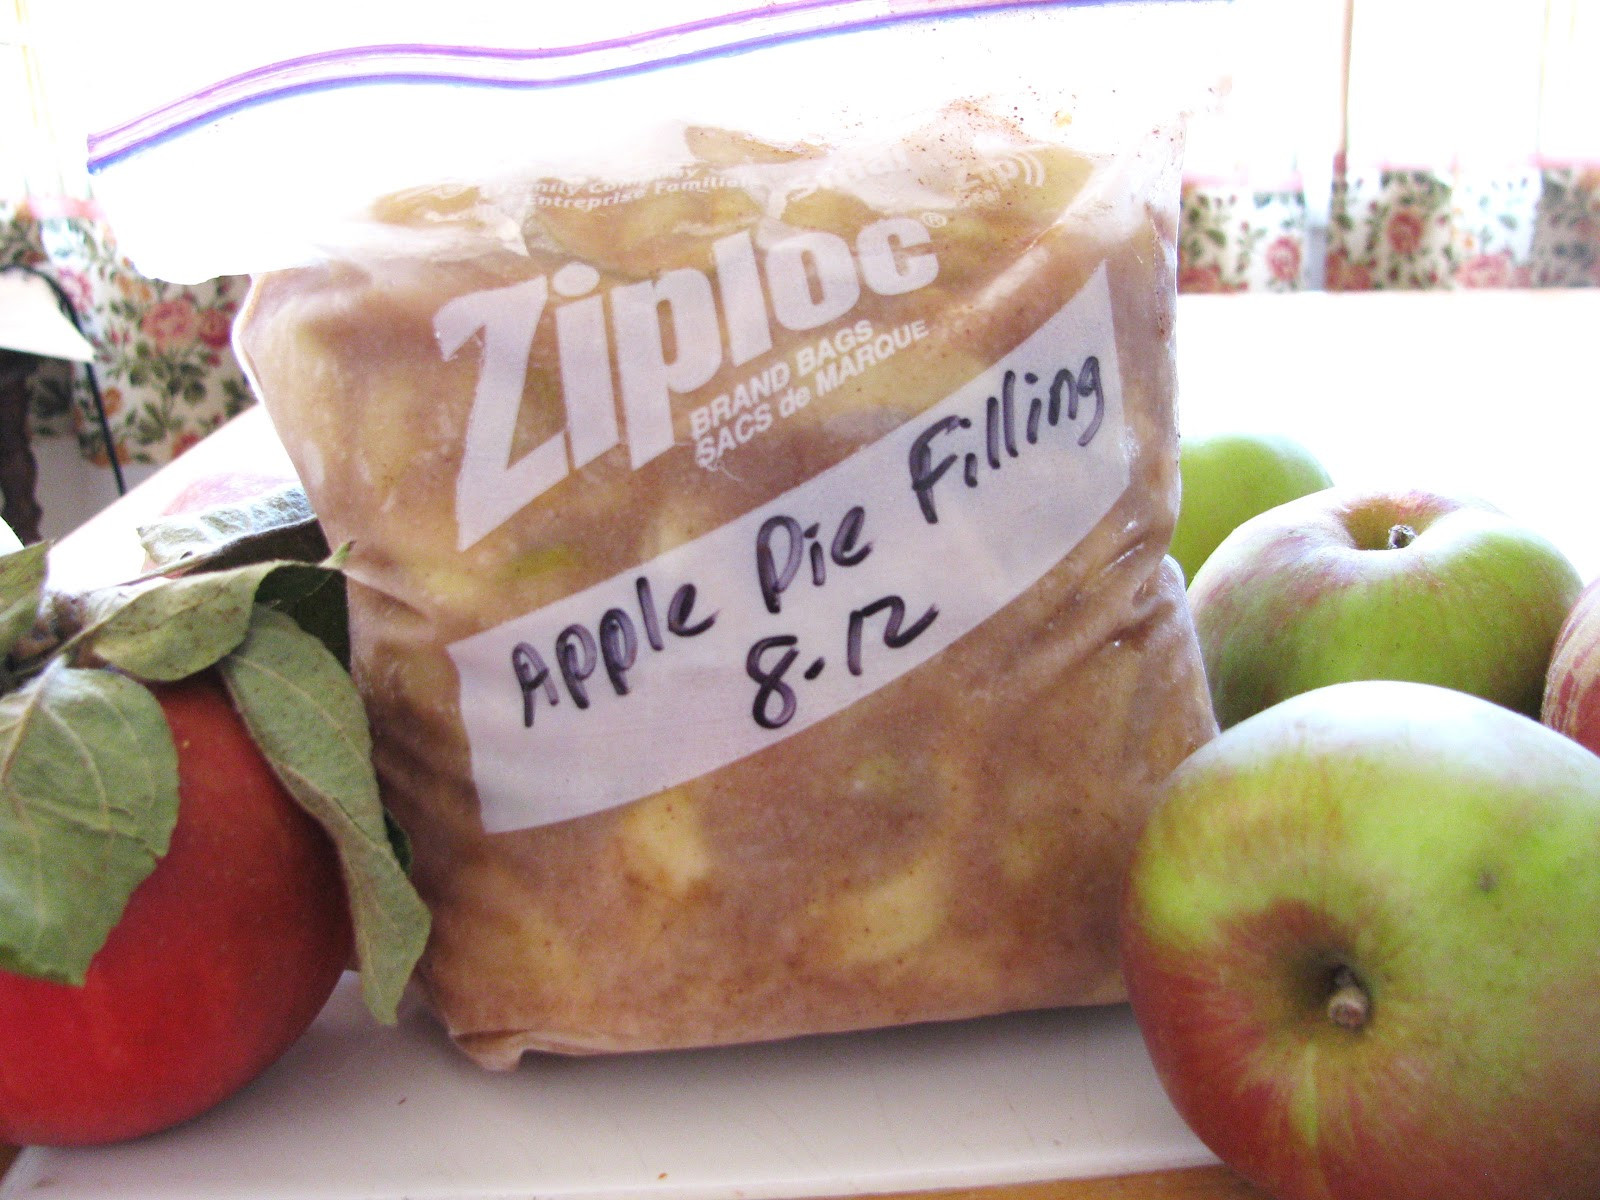 Canning Apple Pie Filling With Clear Jel
 apple pie filling canning recipe without clear jel